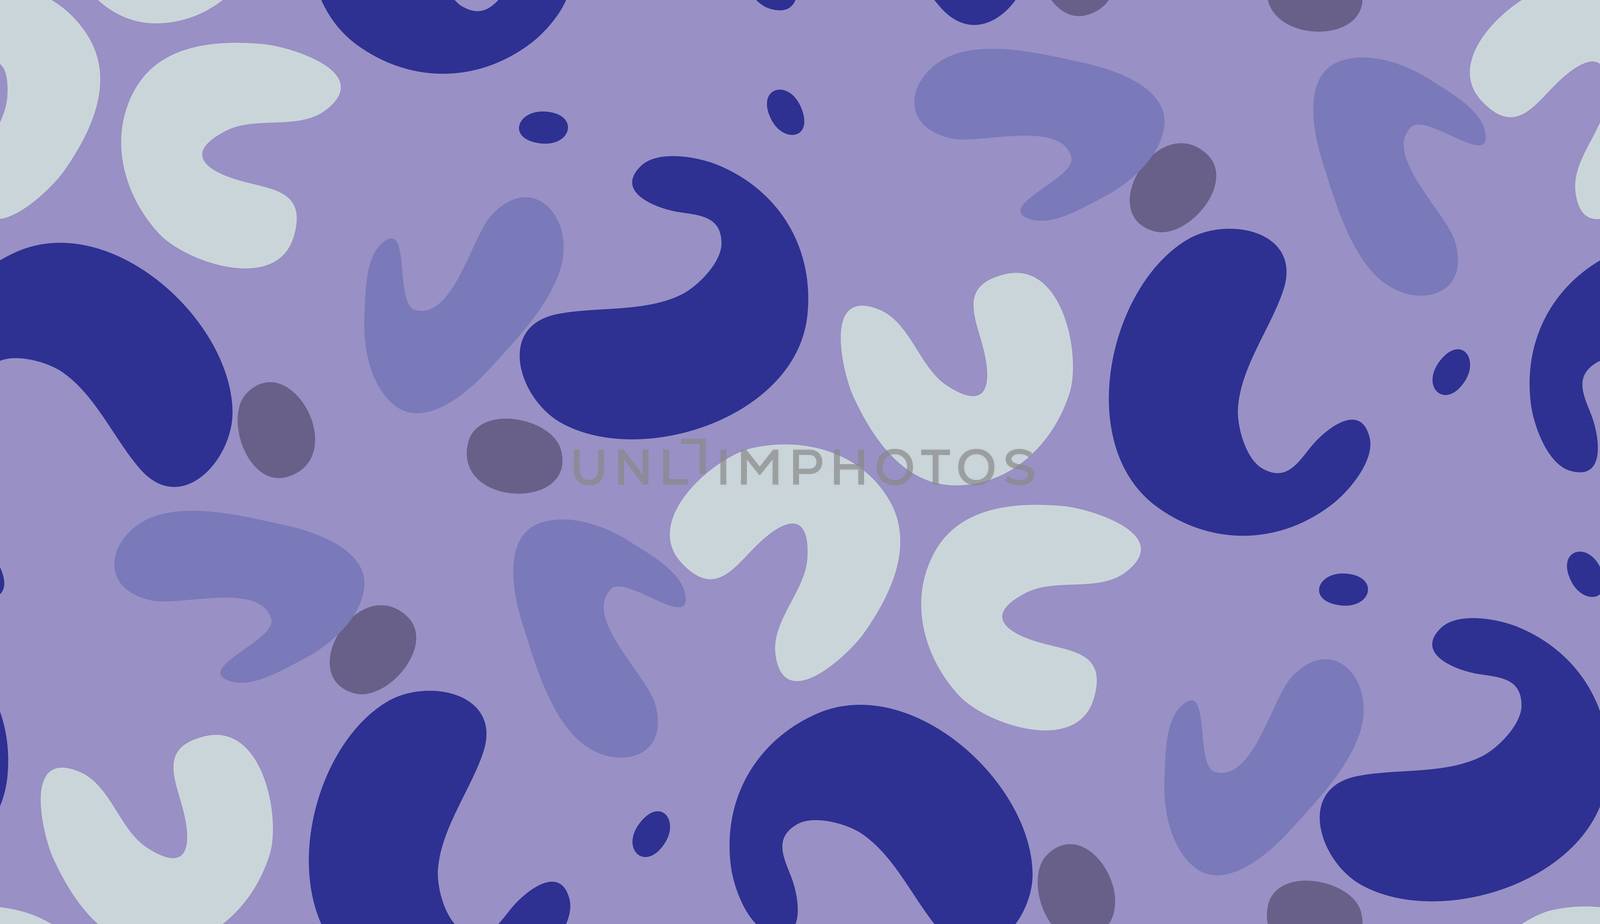 Seamless pattern of purple abstract fortune cookie shapes